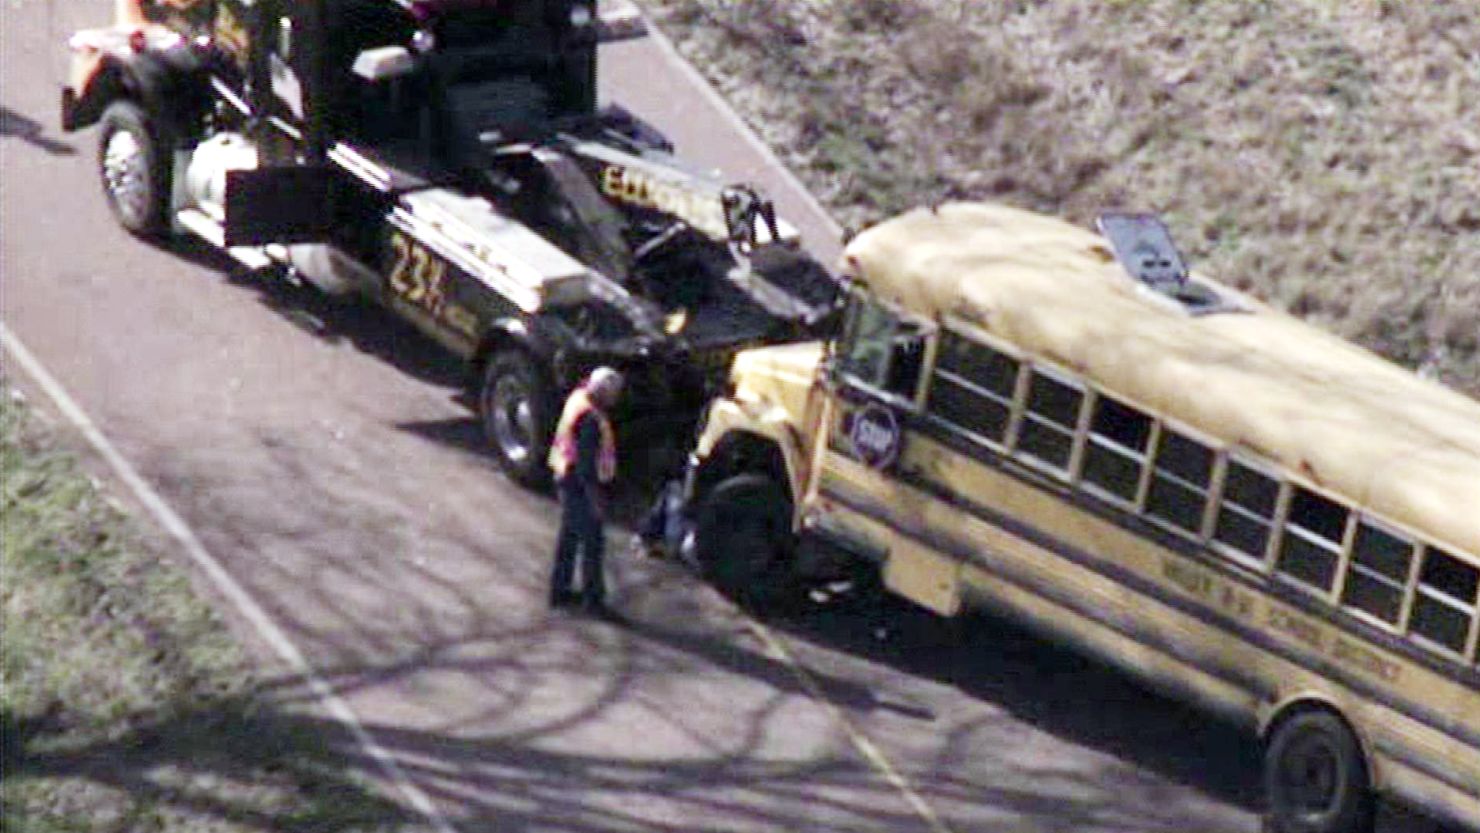 This school bus overturned in Washington County, Missouri, which is southwest of St. Louis.